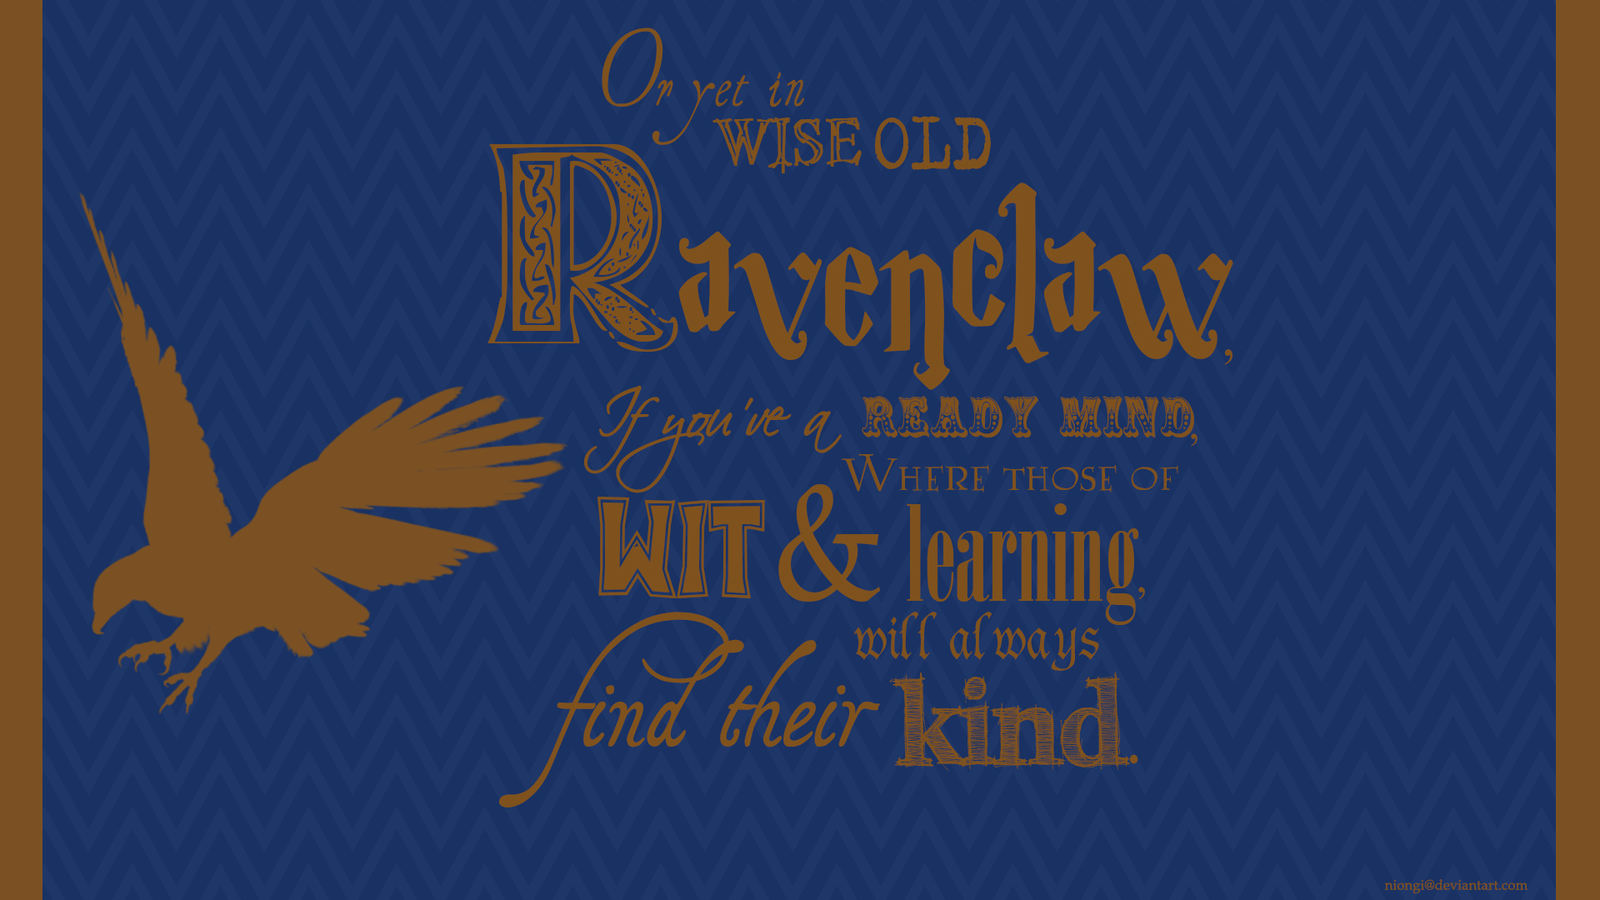 Free download Ravenclaw Colors Ravenclaw wallpaper by niongi [1600x900] for your Desktop, Mobile & Tablet. Explore Harry Potter Ravenclaw Wallpaper. Harry Potter Wallpaper, Harry Potter Twitter Background, Harry Potter Gryffindor Wallpaper